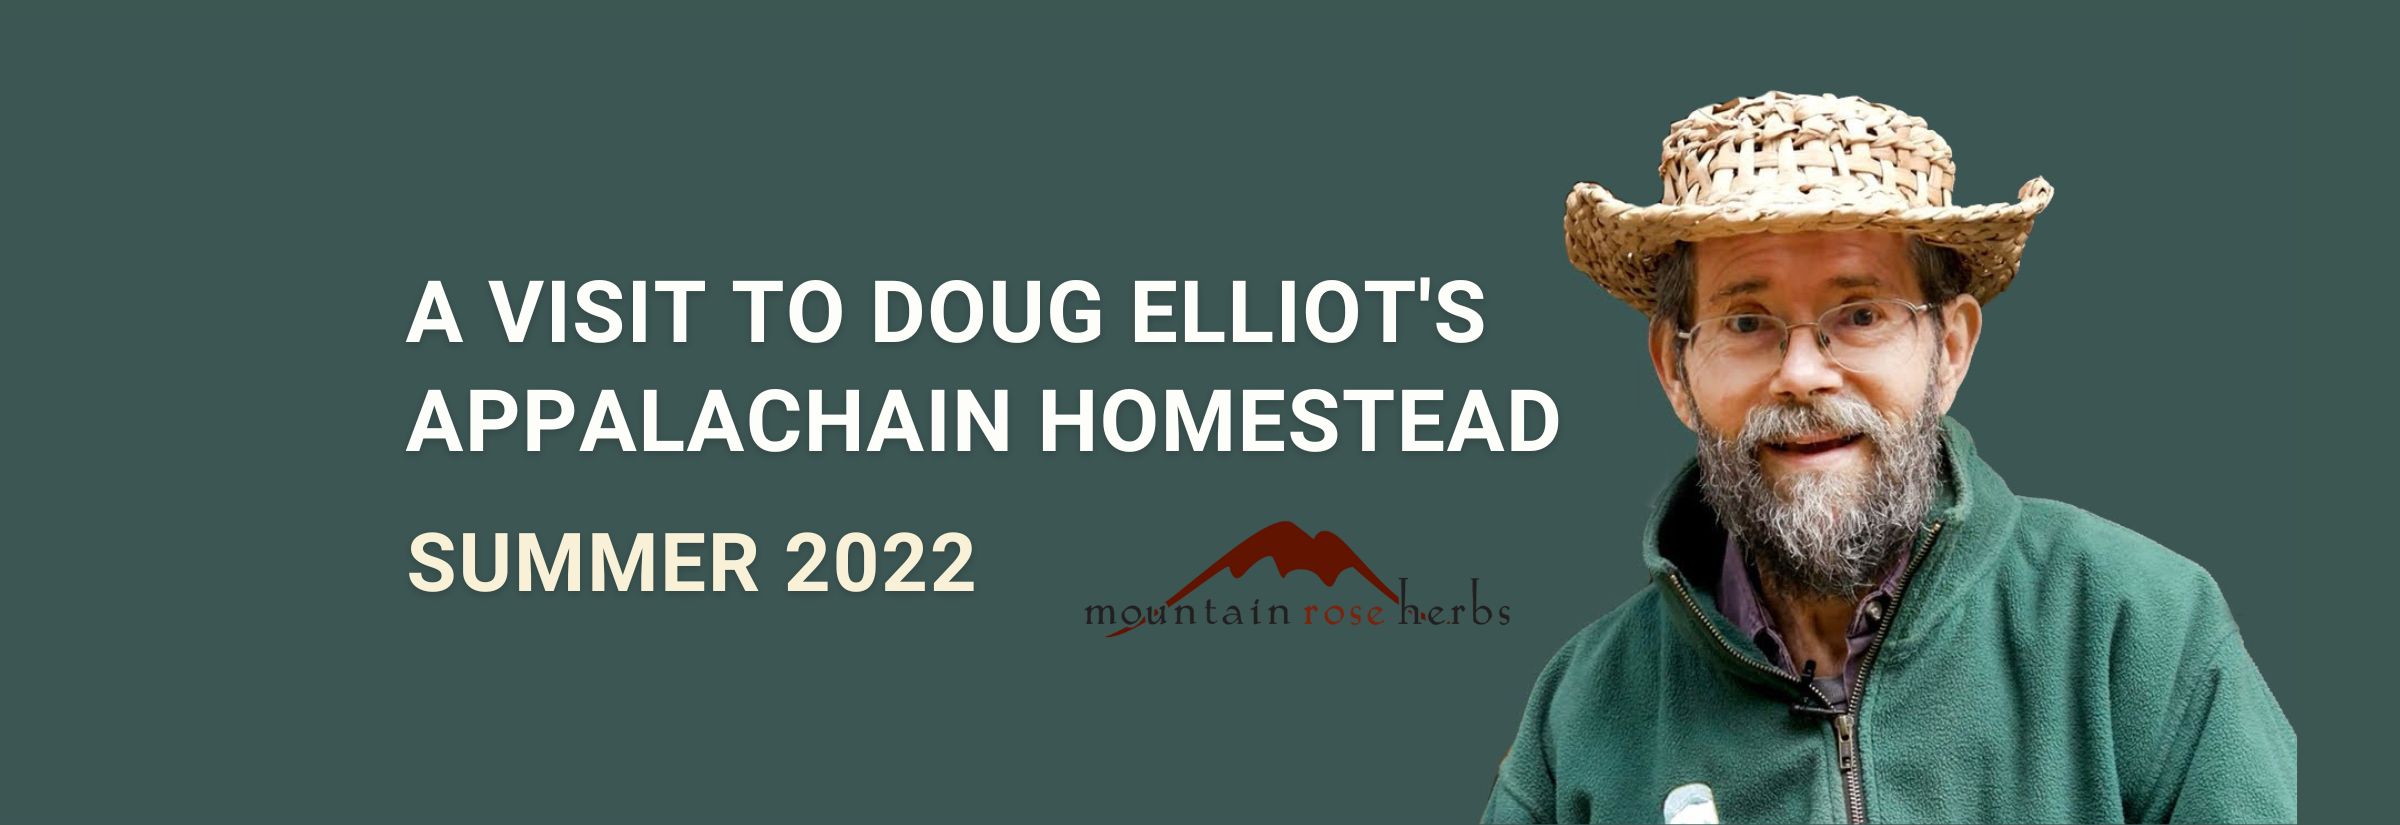 A Photo Collection From Our Visit to Doug Elliot's Appalachian Homestead in 2022